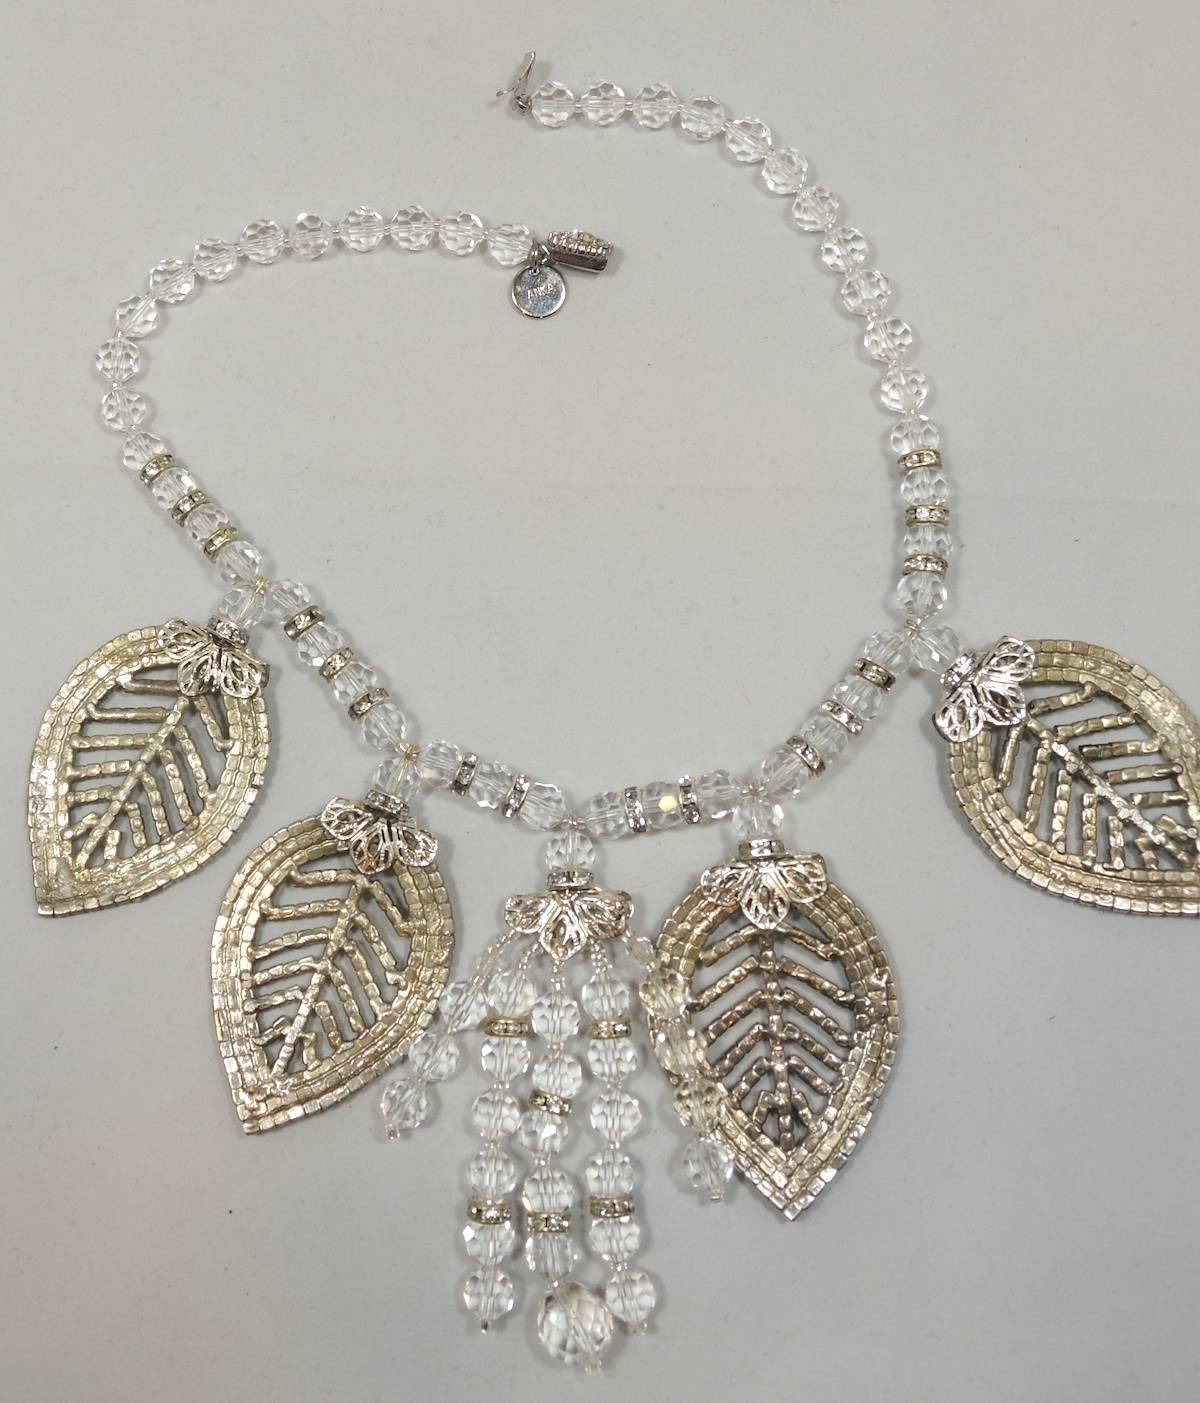 This one of a kind Anka necklace features a crystal bead necklace with four large sized crystal leaves centered with 4 dangling crystal rows. It has a slide in floral clasp. It measures 17” x 1/4” The leaves measure 2-1/2” x 1-1/2”. It is signed